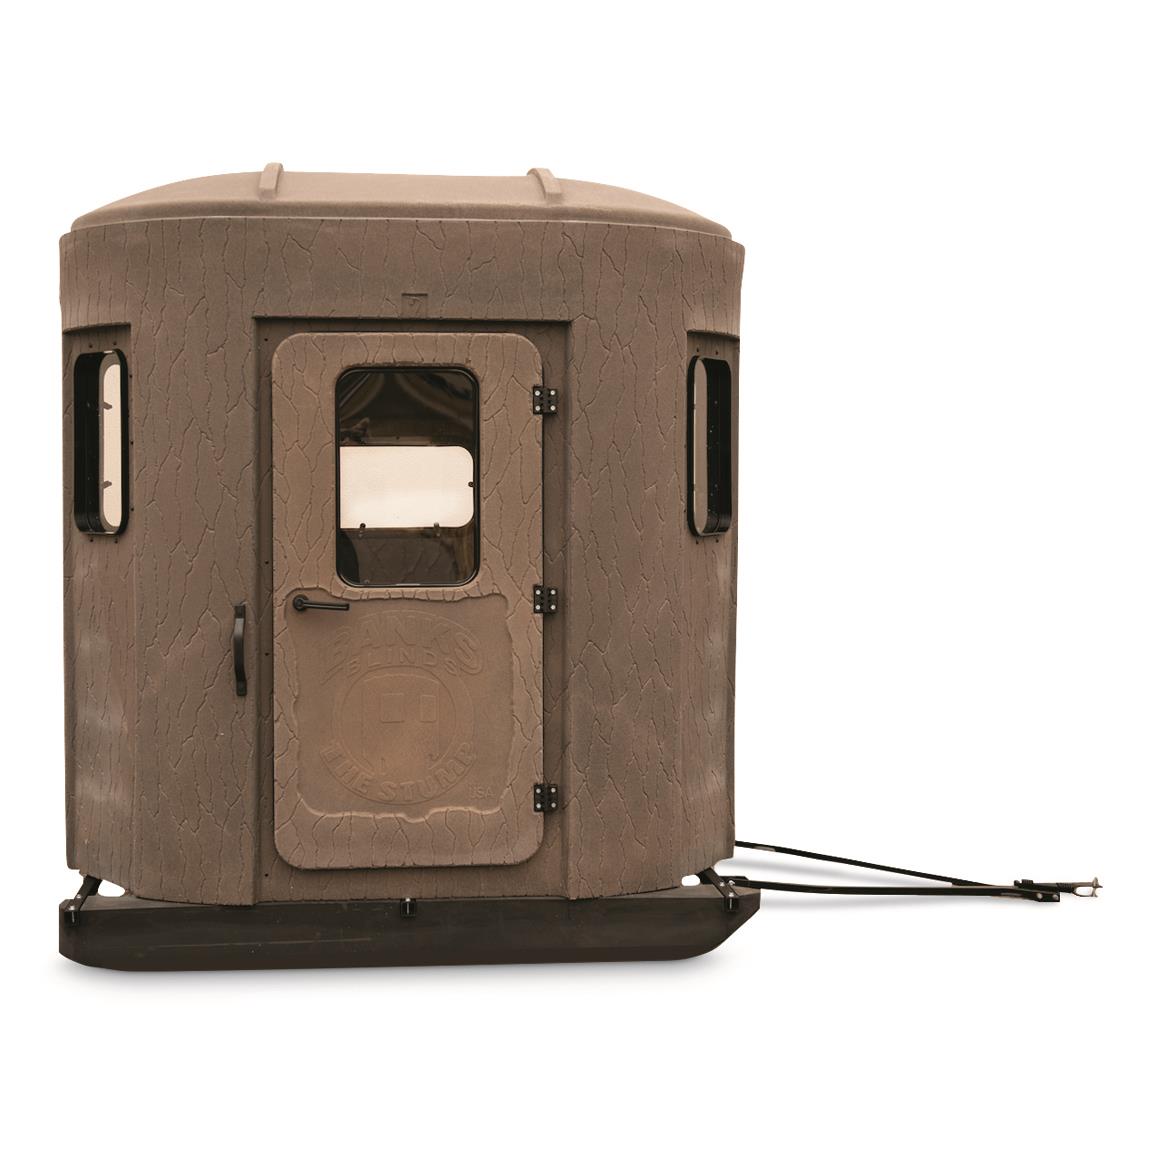 Banks Outdoors The Stump 2 Scout Hunting Blind